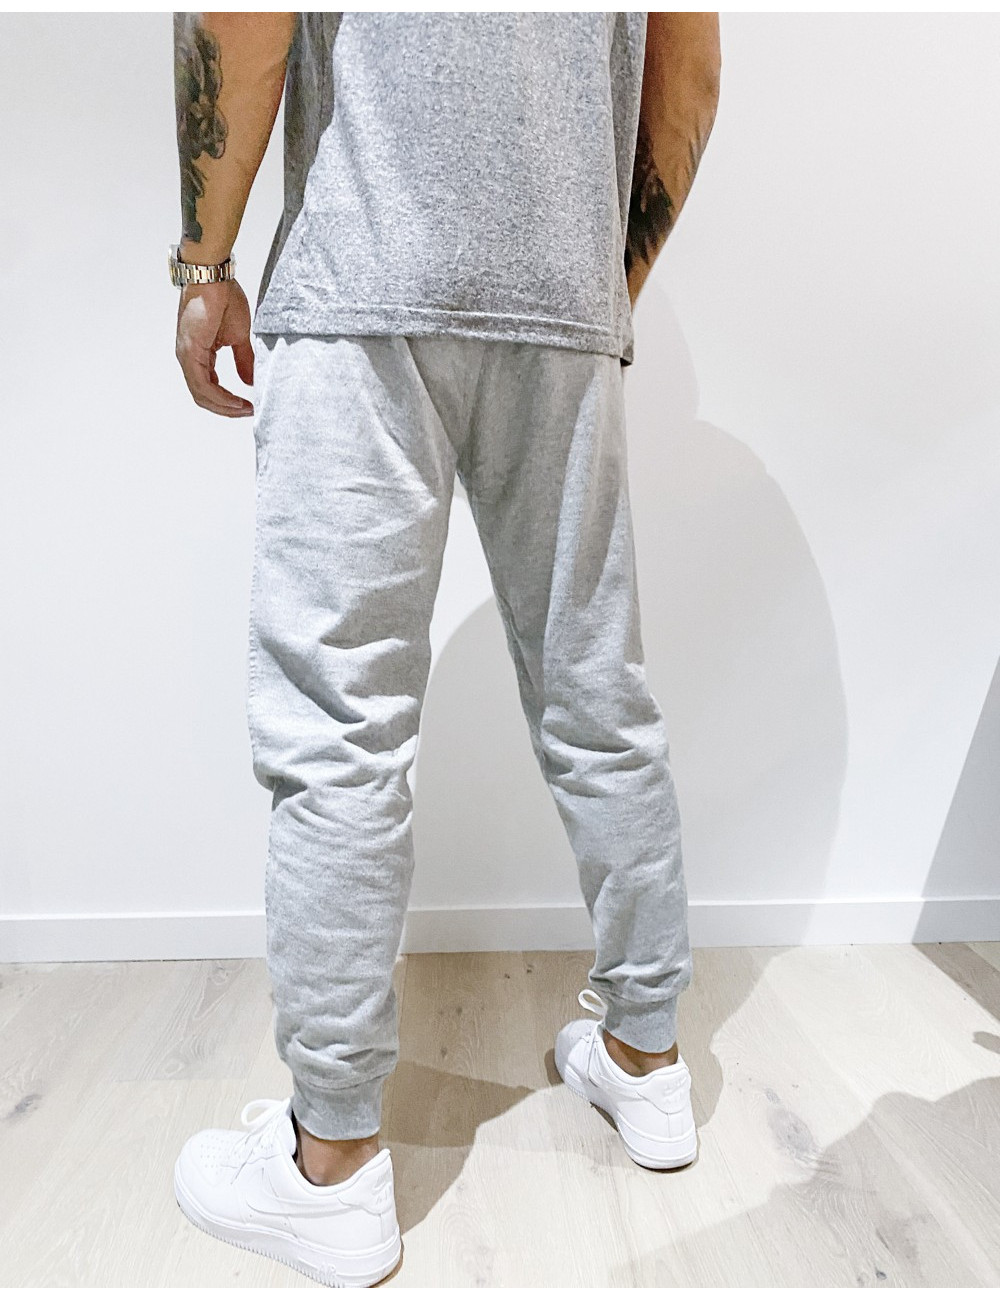 J Crew rugby joggers